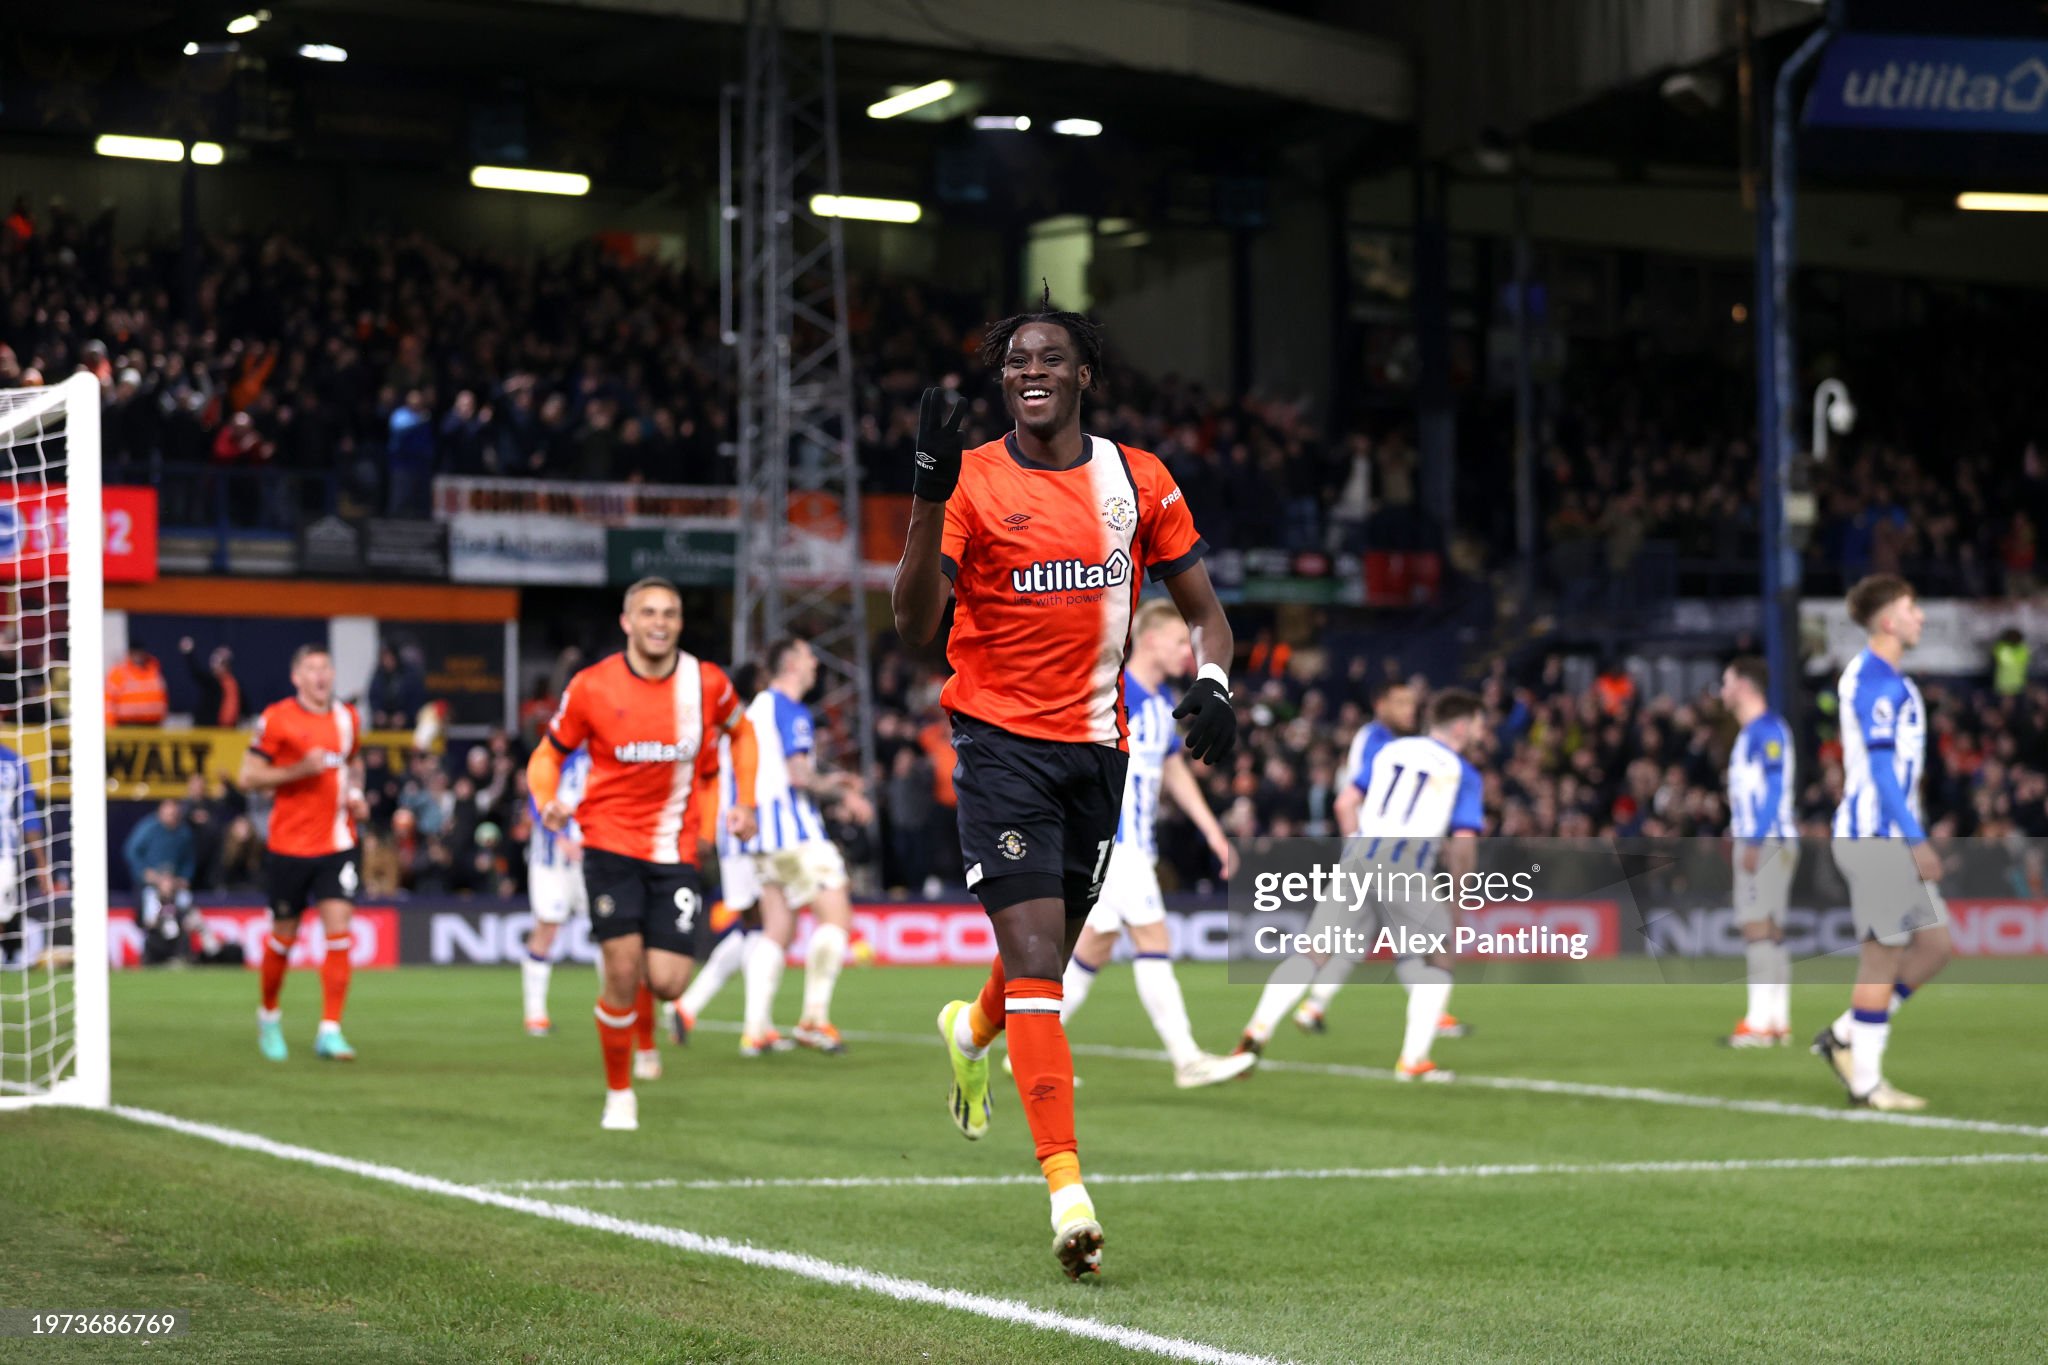 Luton thrashes Brighton, Crystal Palace overturns result, and Newcastle triumphs